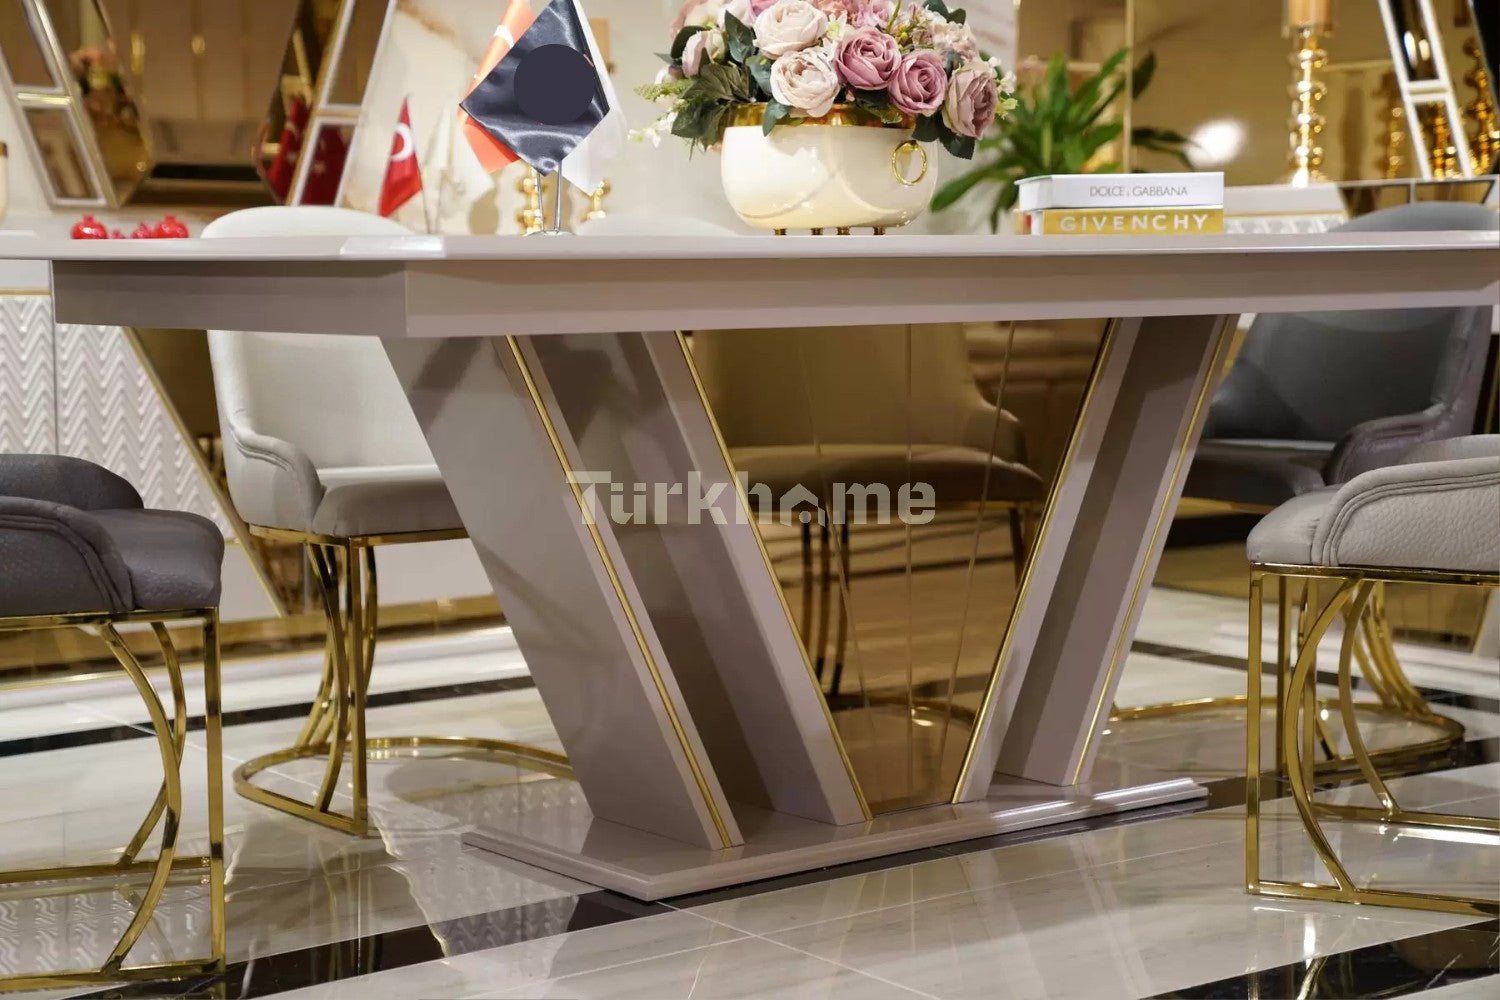 GALAXY Dining Table + 6 Chairs